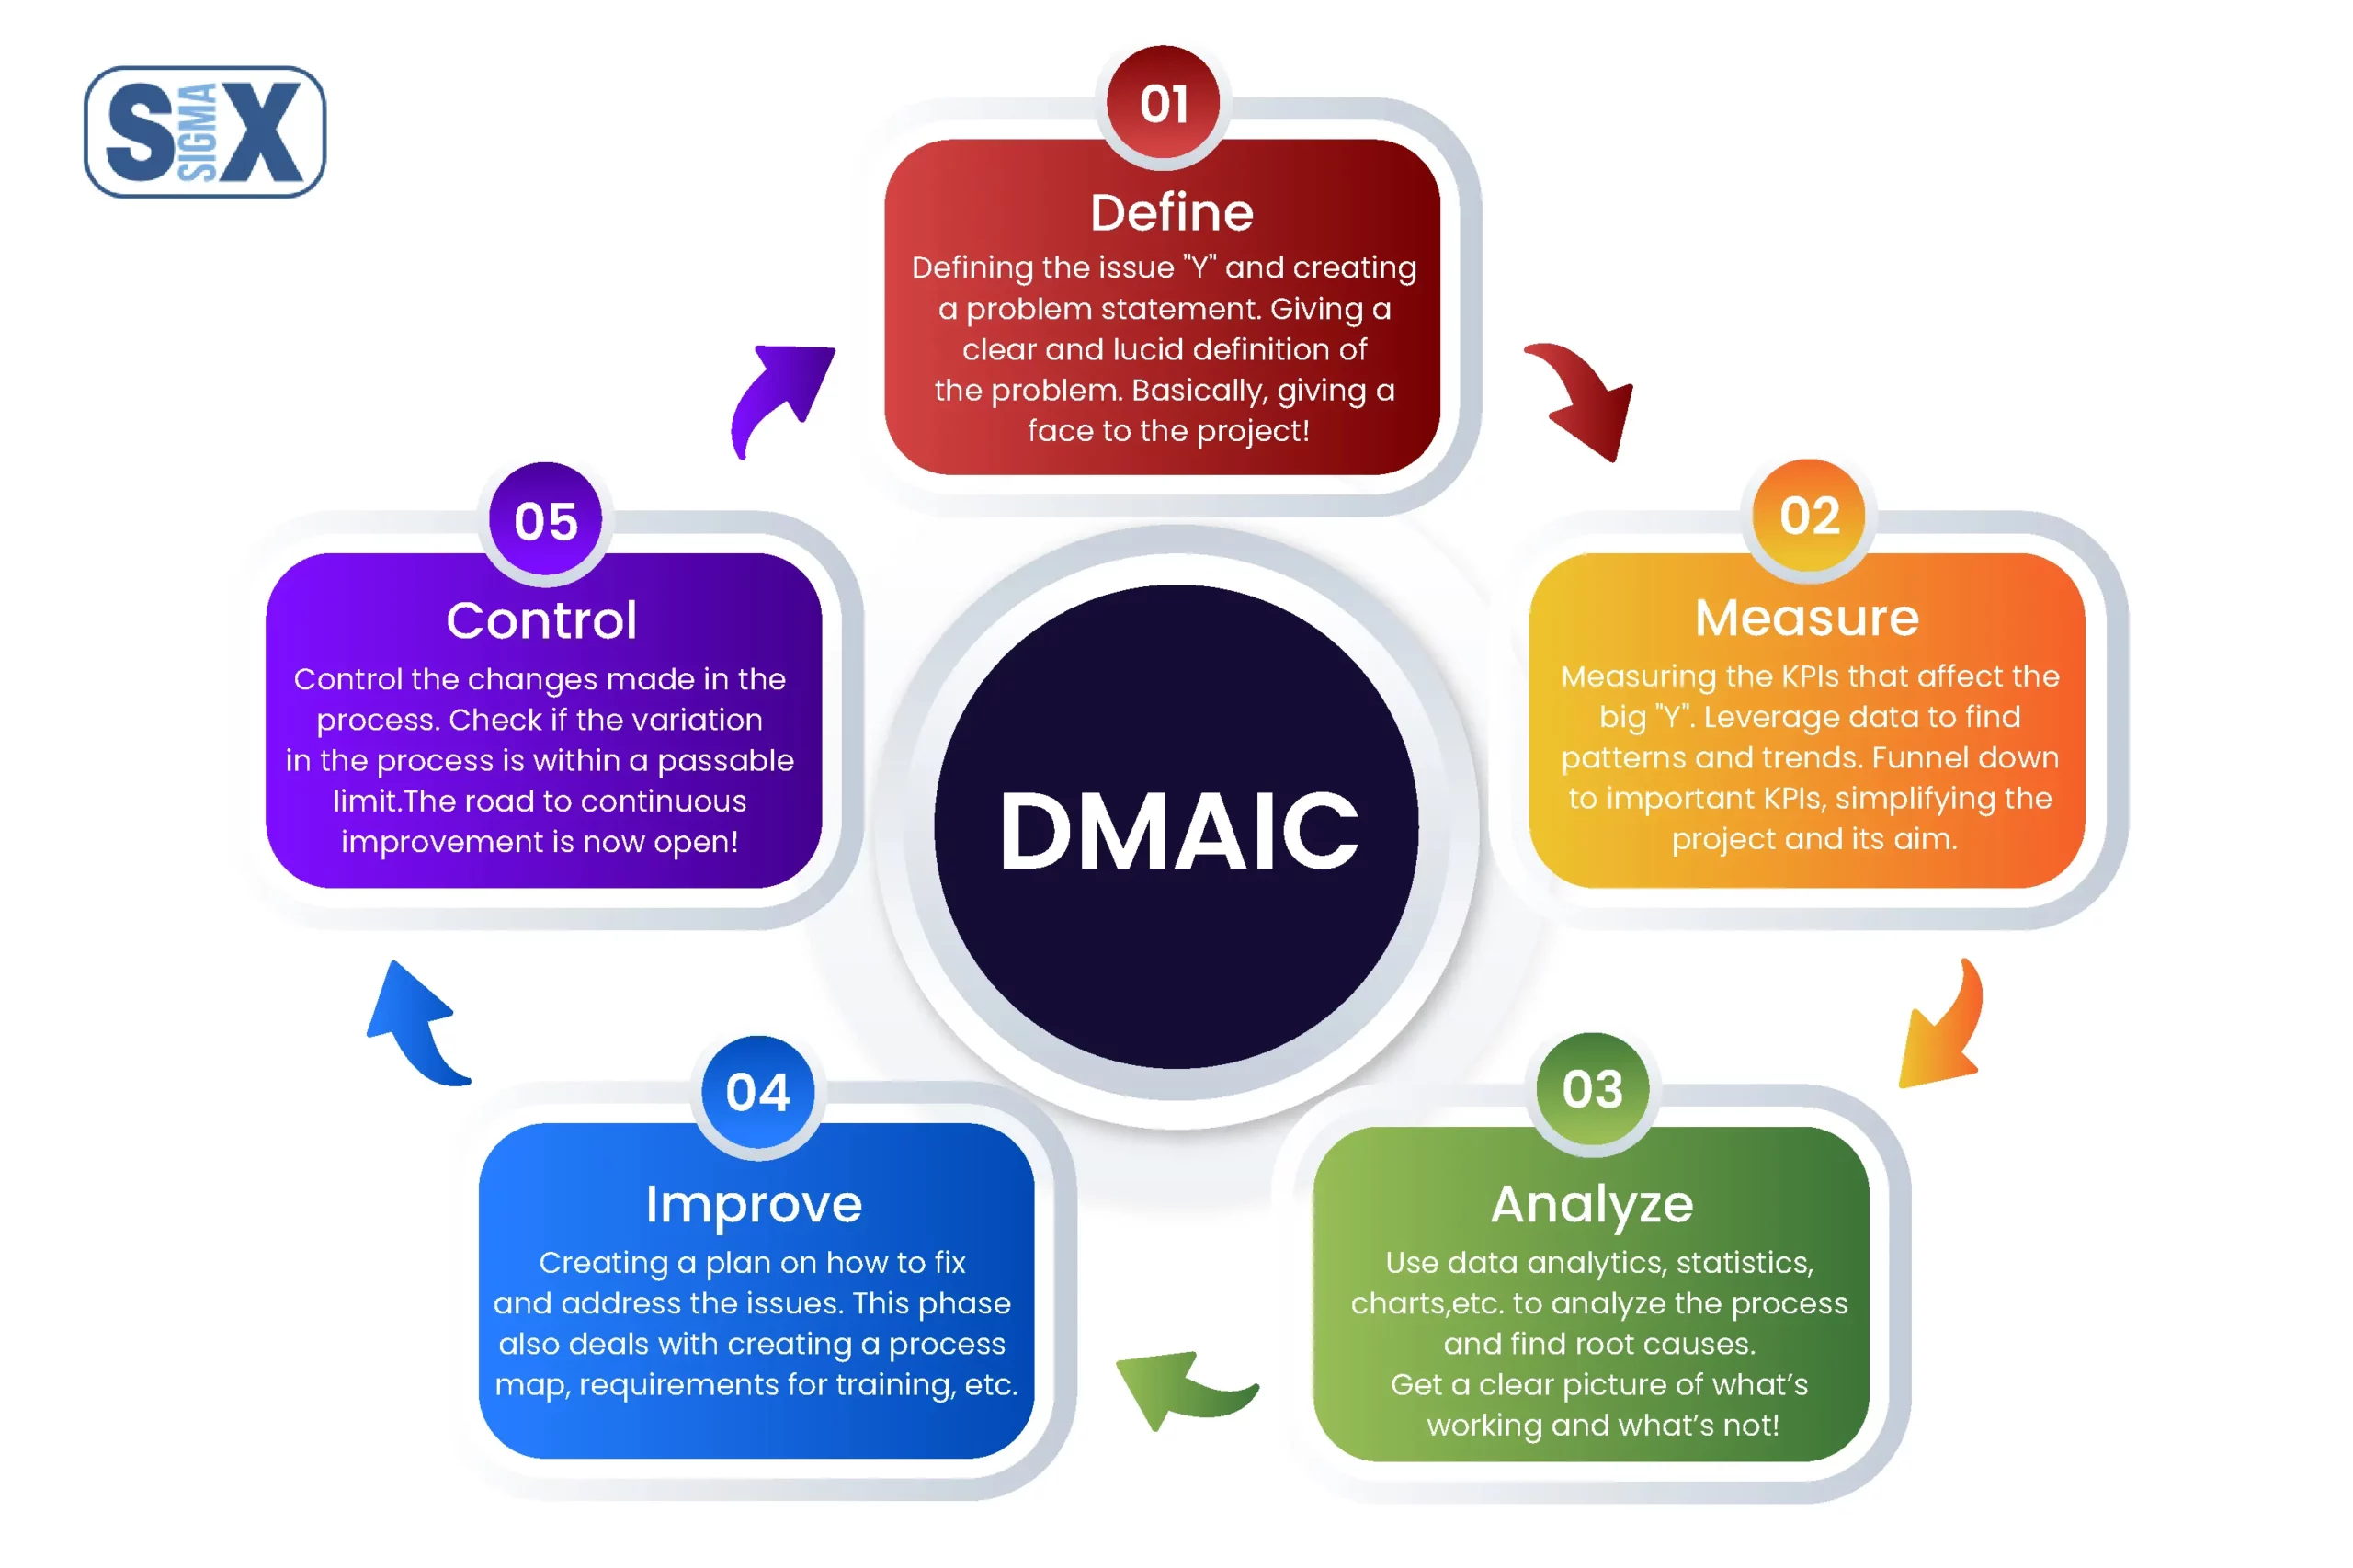 Image: DMAIC Phases